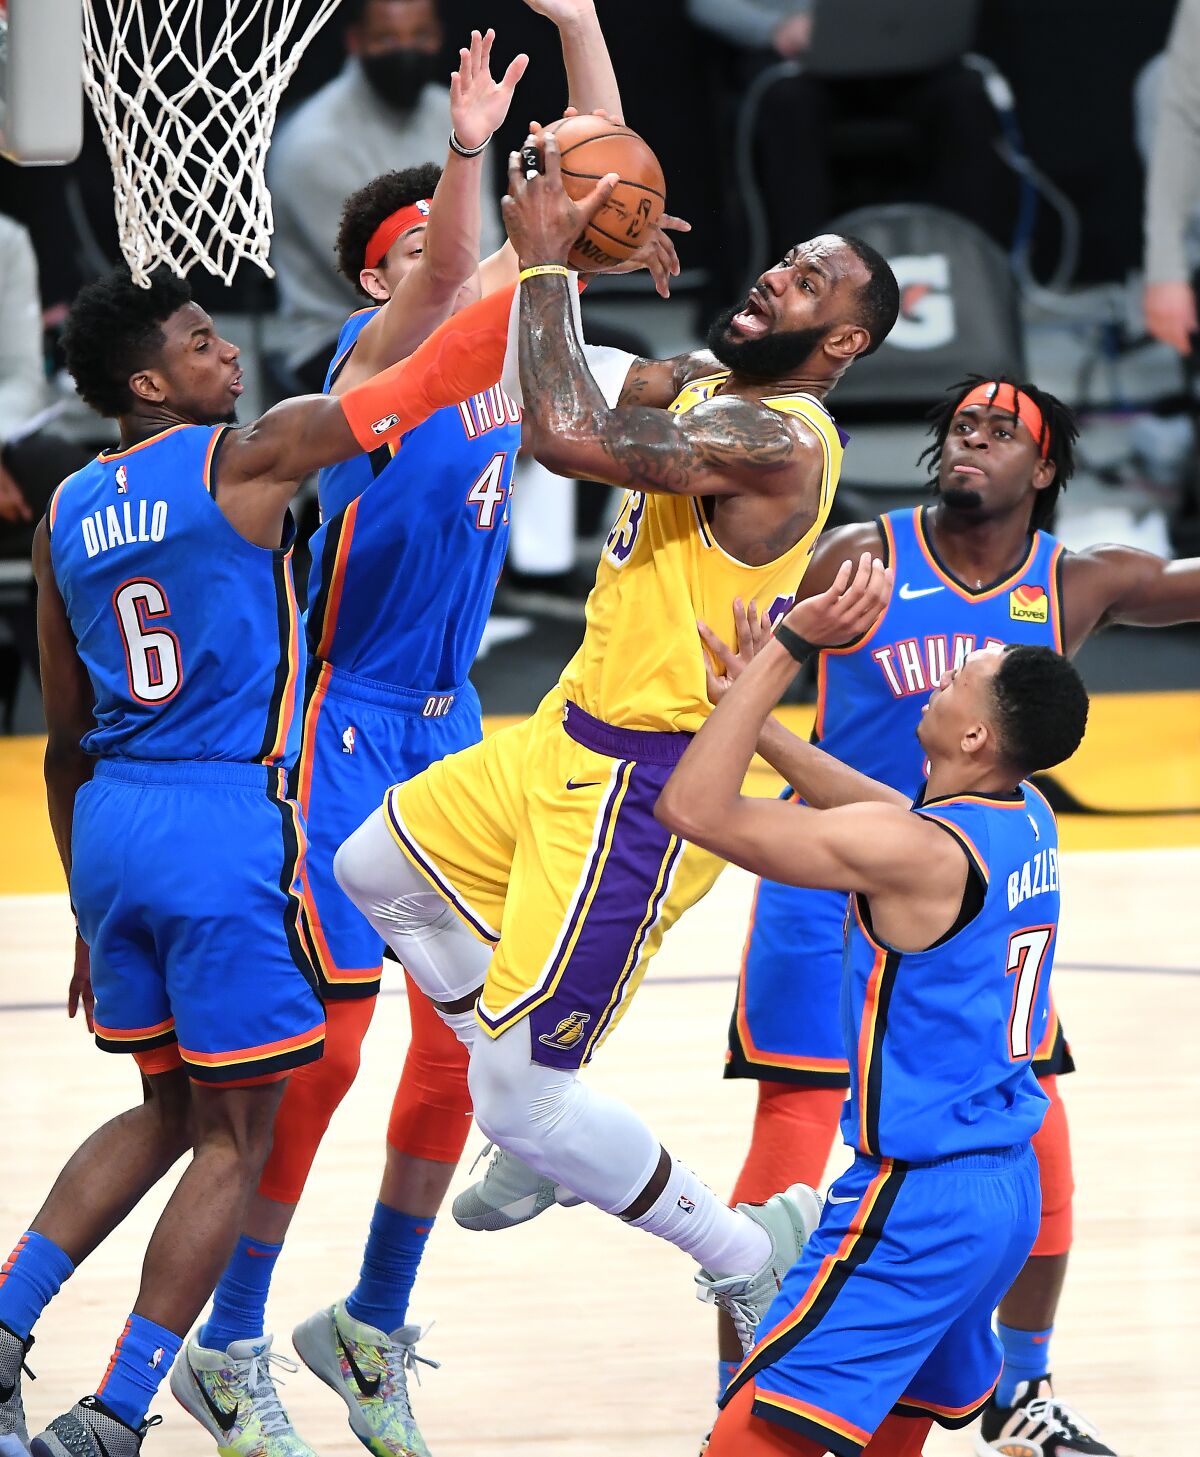 The Lakers' LeBron James beats four Thunder defenders to score a basket.